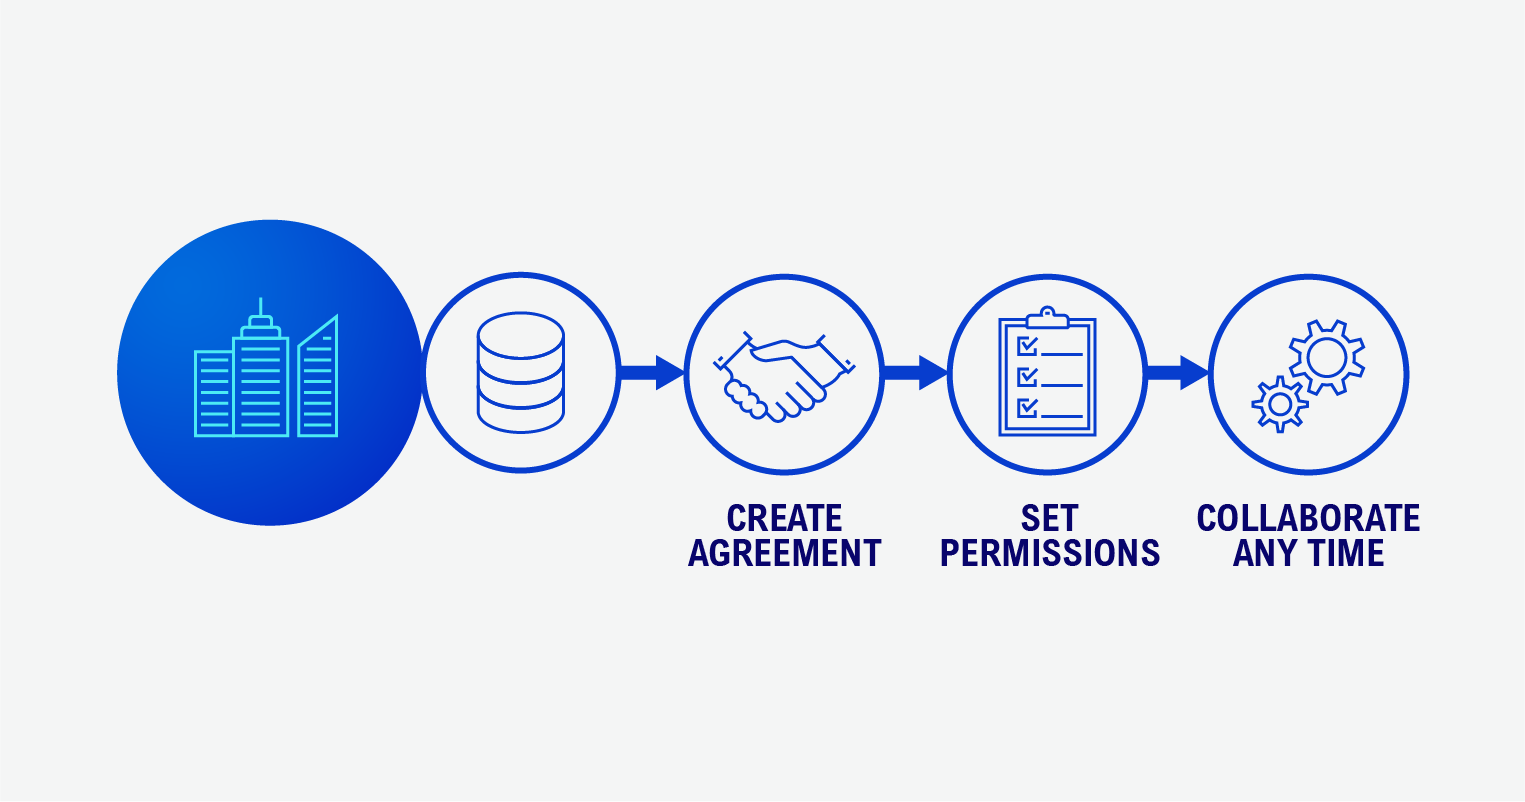 TripleBlind Process: Create Agreement, Set Permissions, Collaborate Any Time